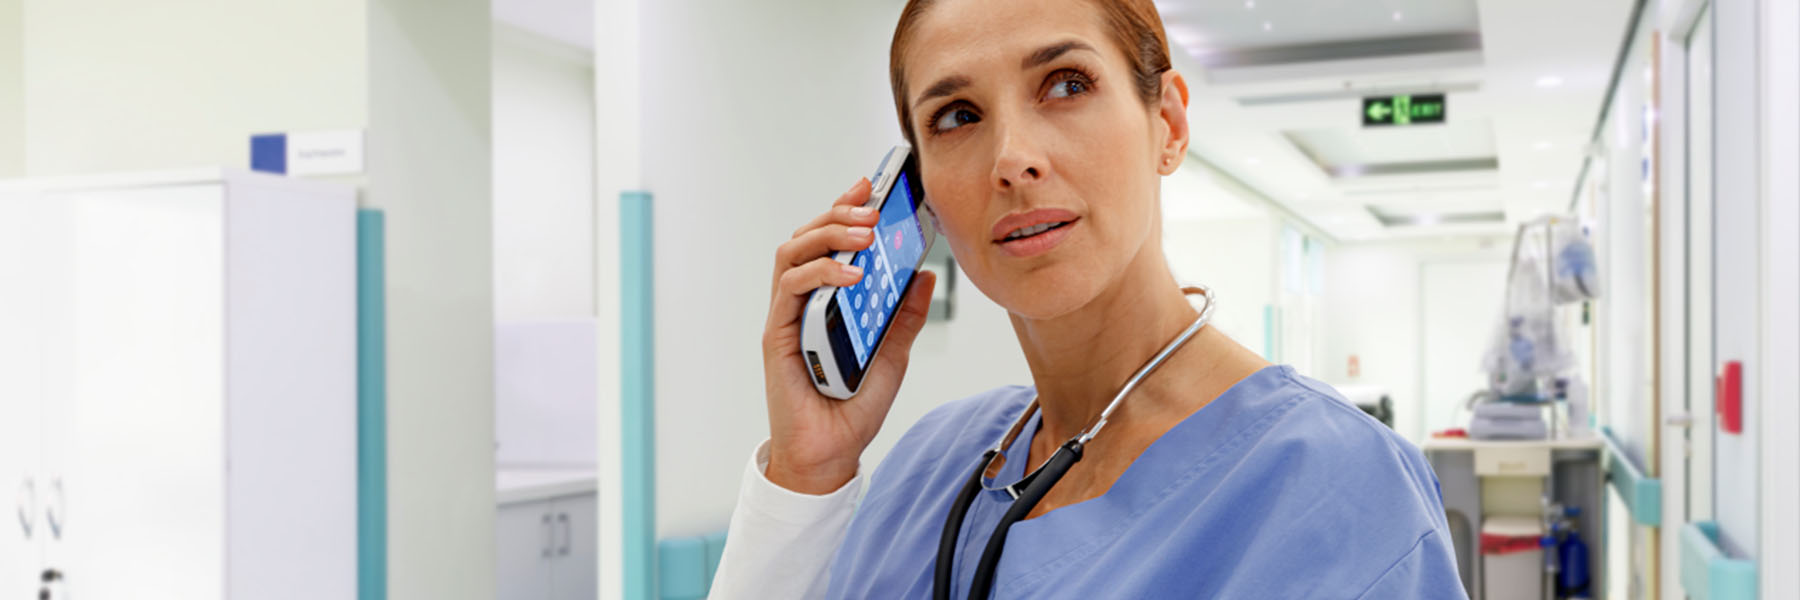 true-healthcare-mobility-banner